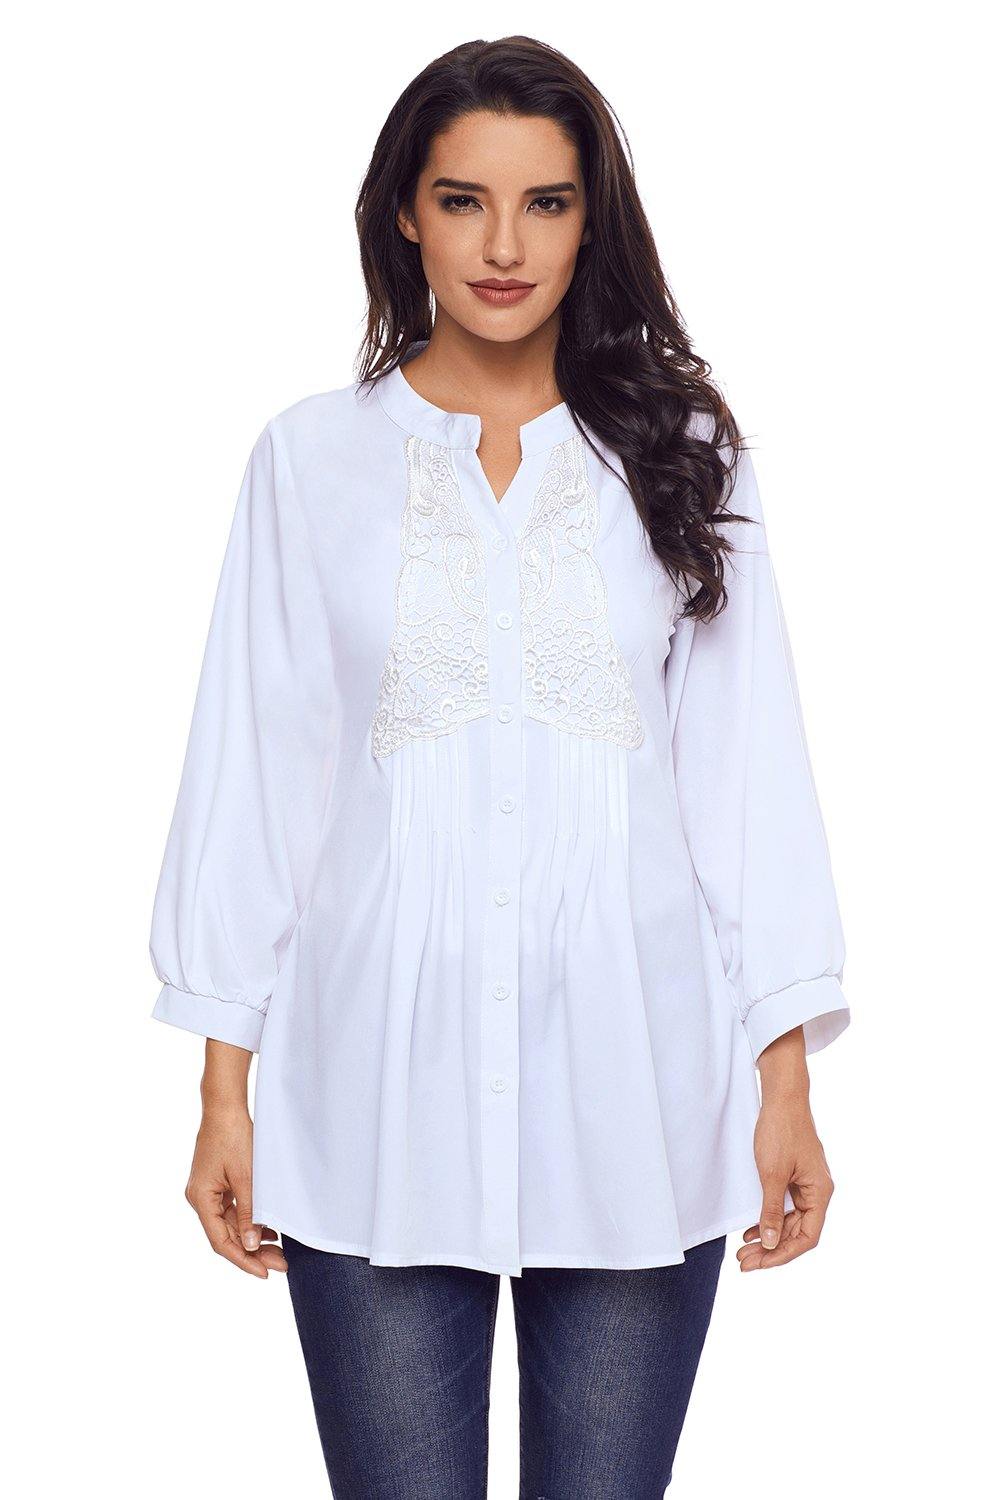 Lace and Pleated Detail Button up Blouse - L & M Kee, LLC